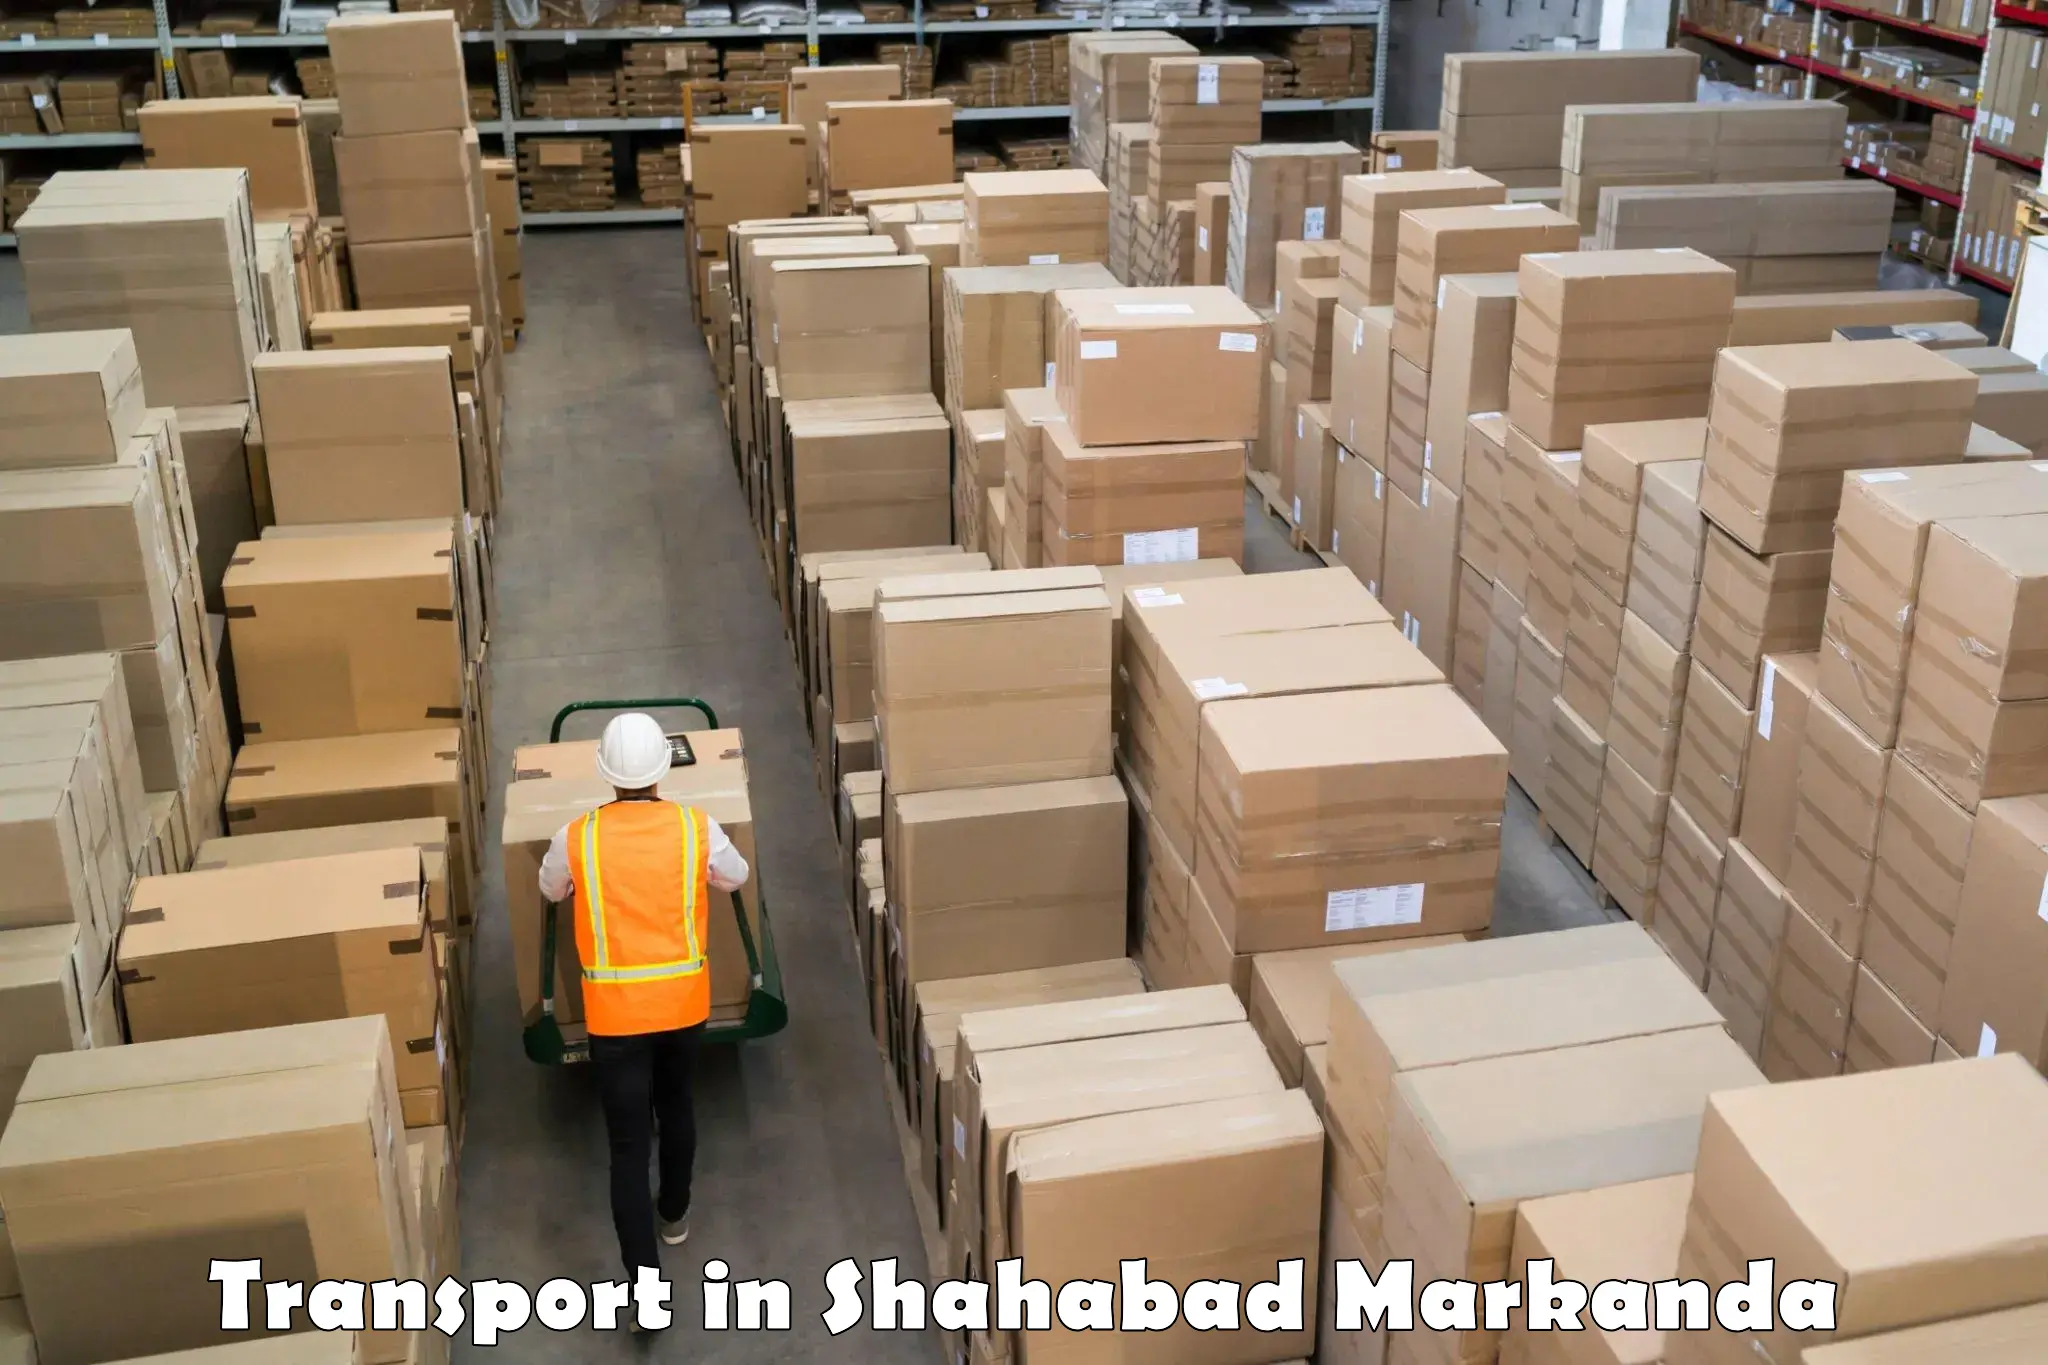 Air freight transport services in Shahabad Markanda